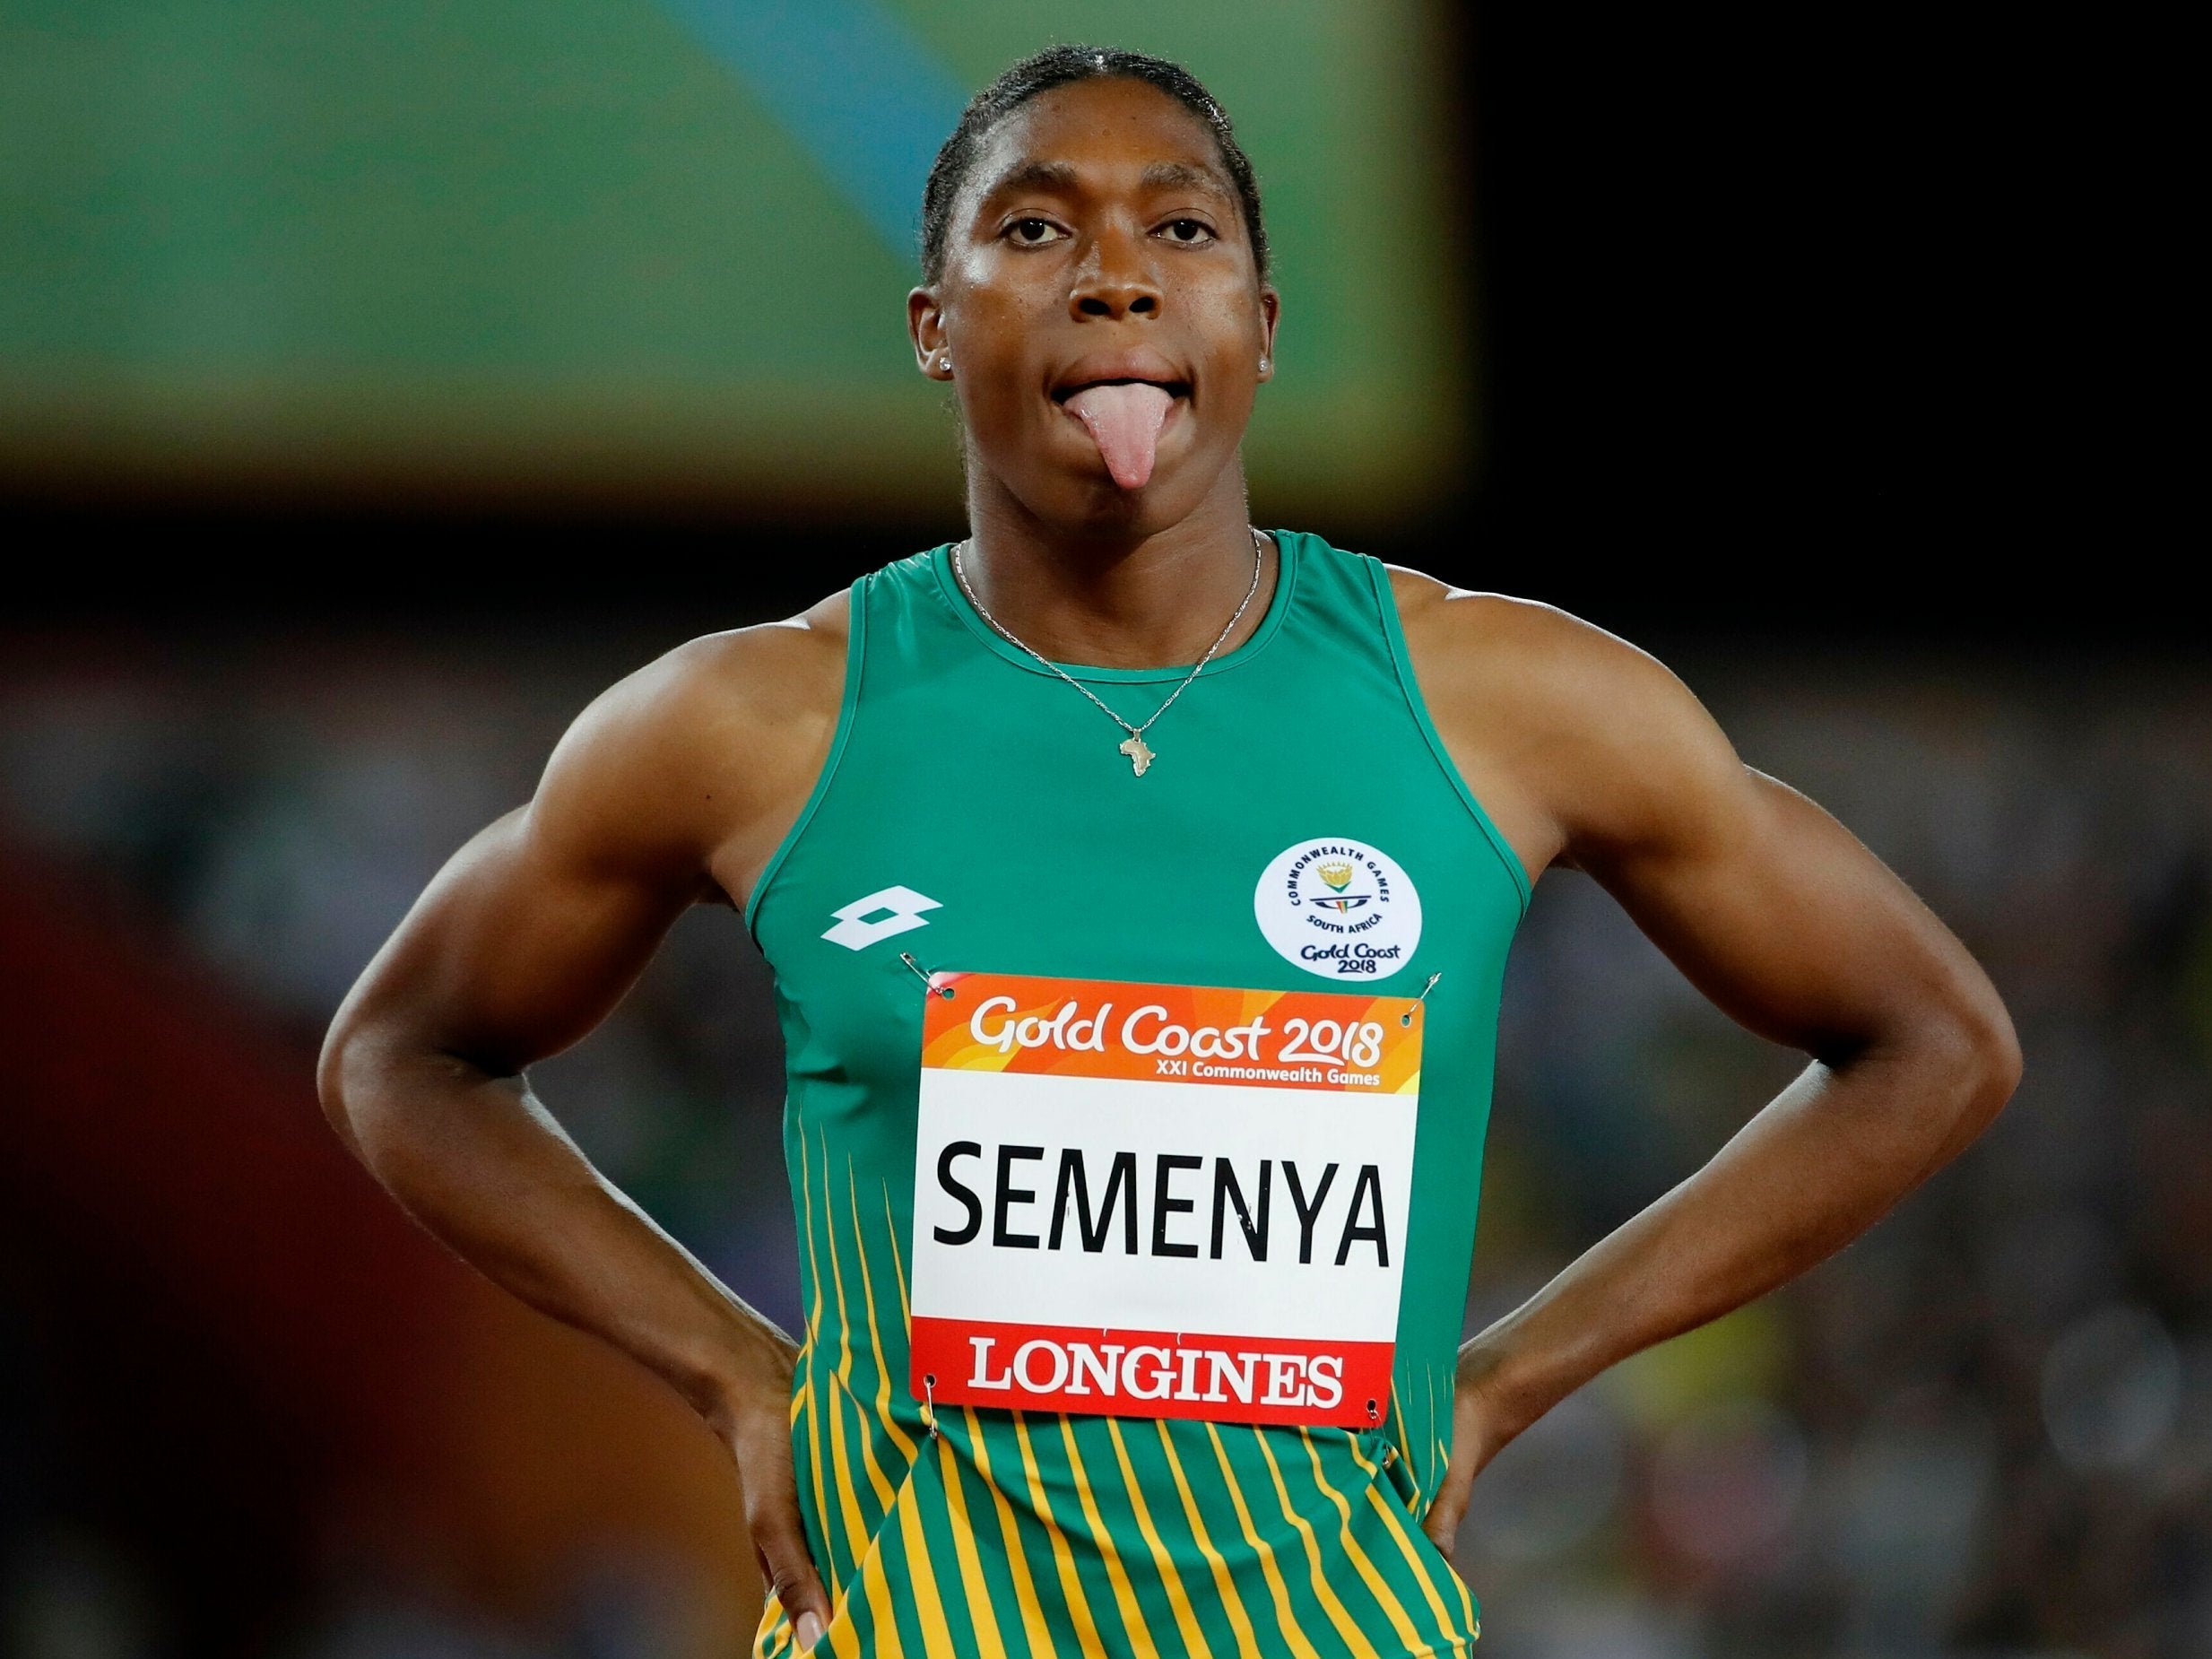 Semenya will have to lower her testosterone levels in order to compete against other women